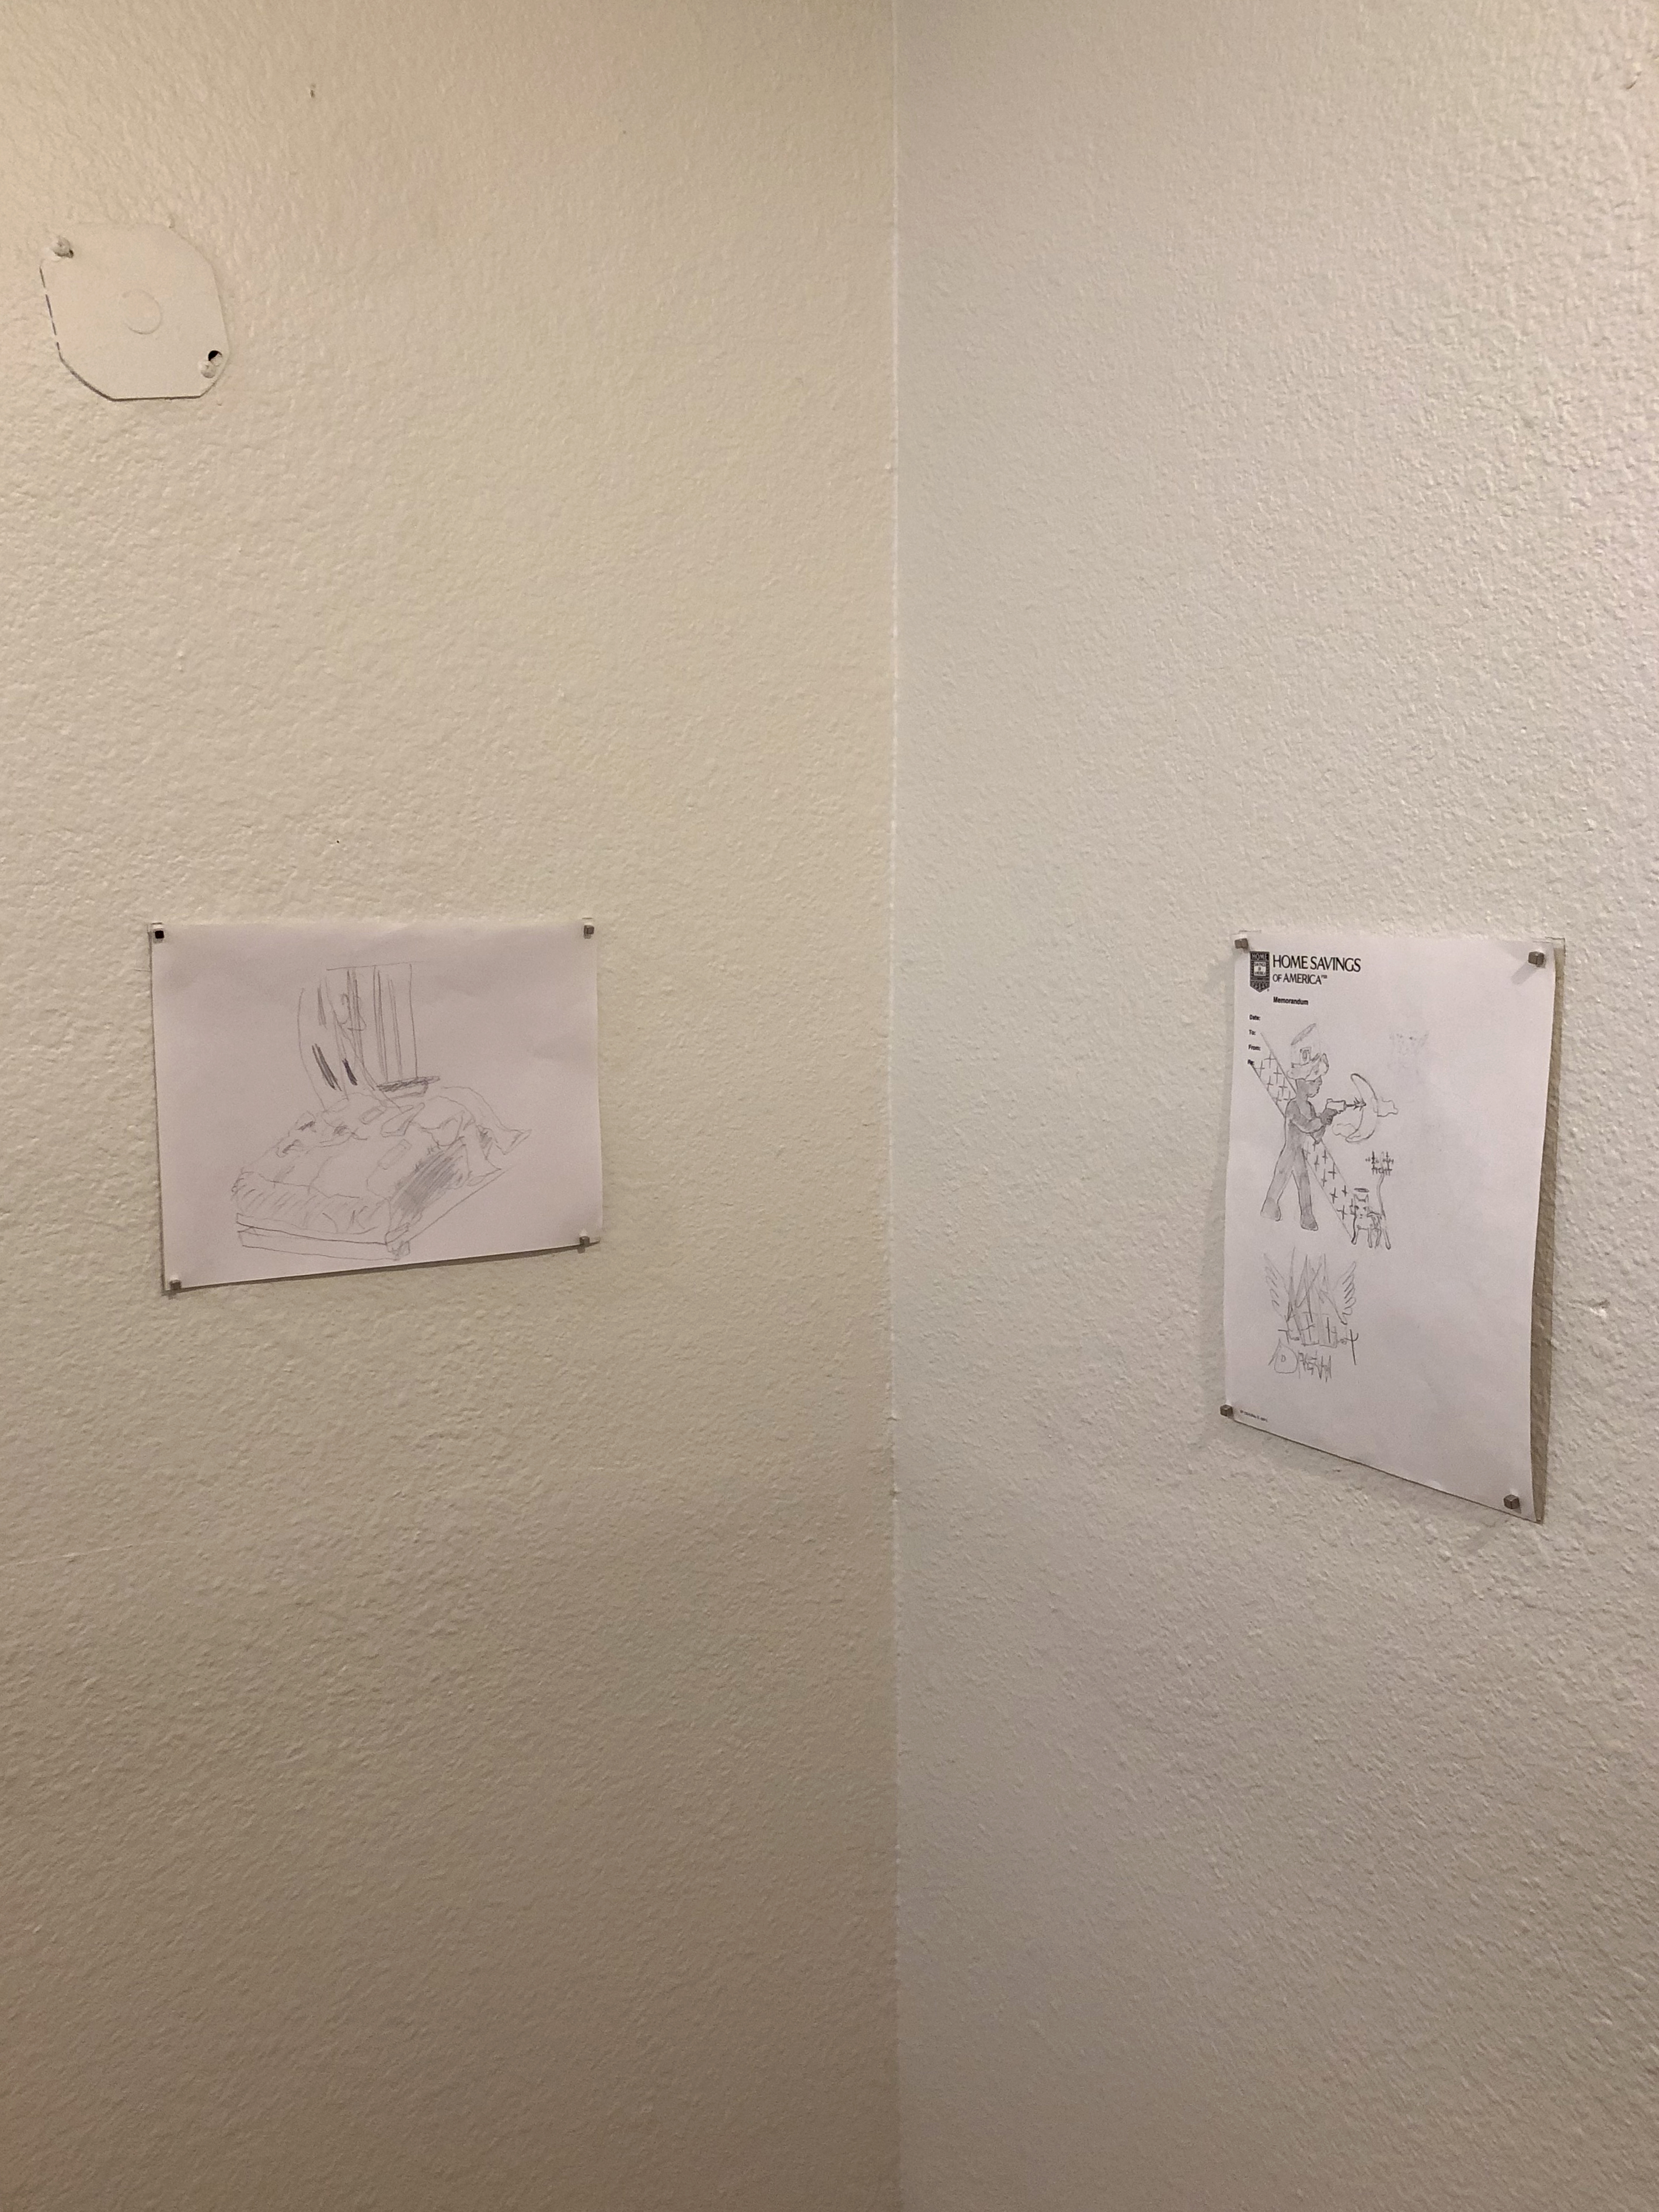 Two small drawings hung on two white walls that form a corner